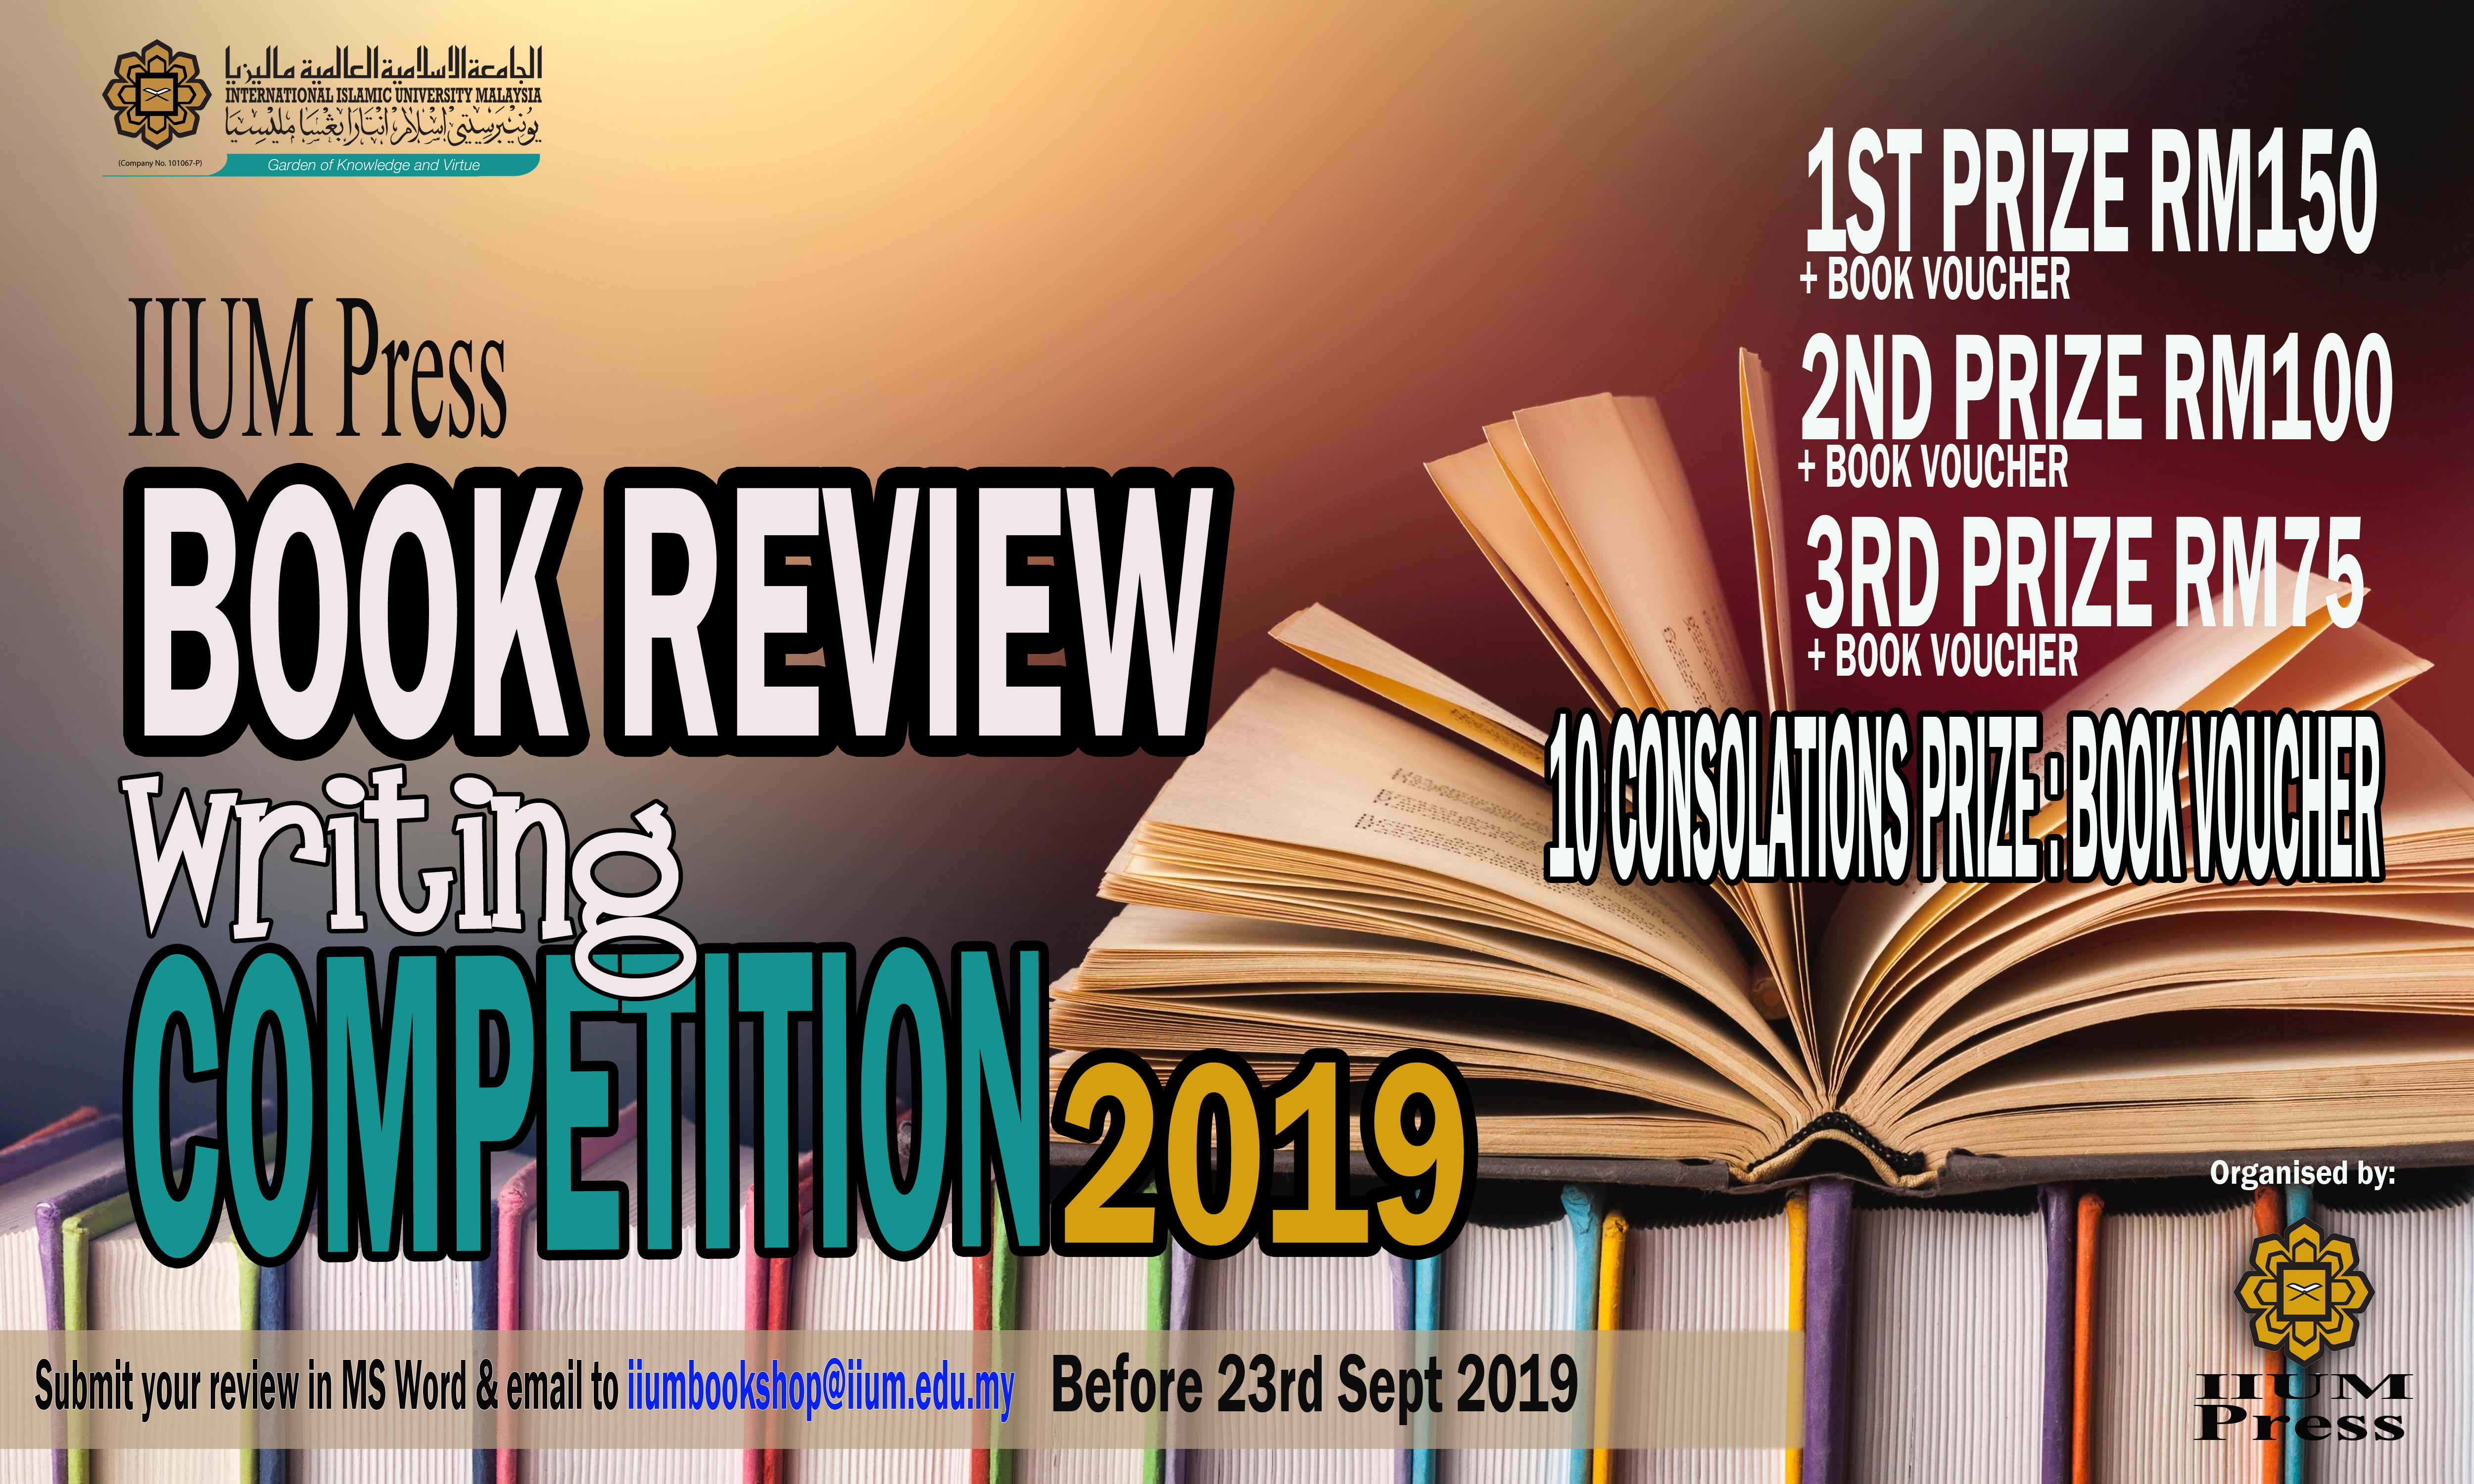 IIUM Press Book Review Writing Competition 2019